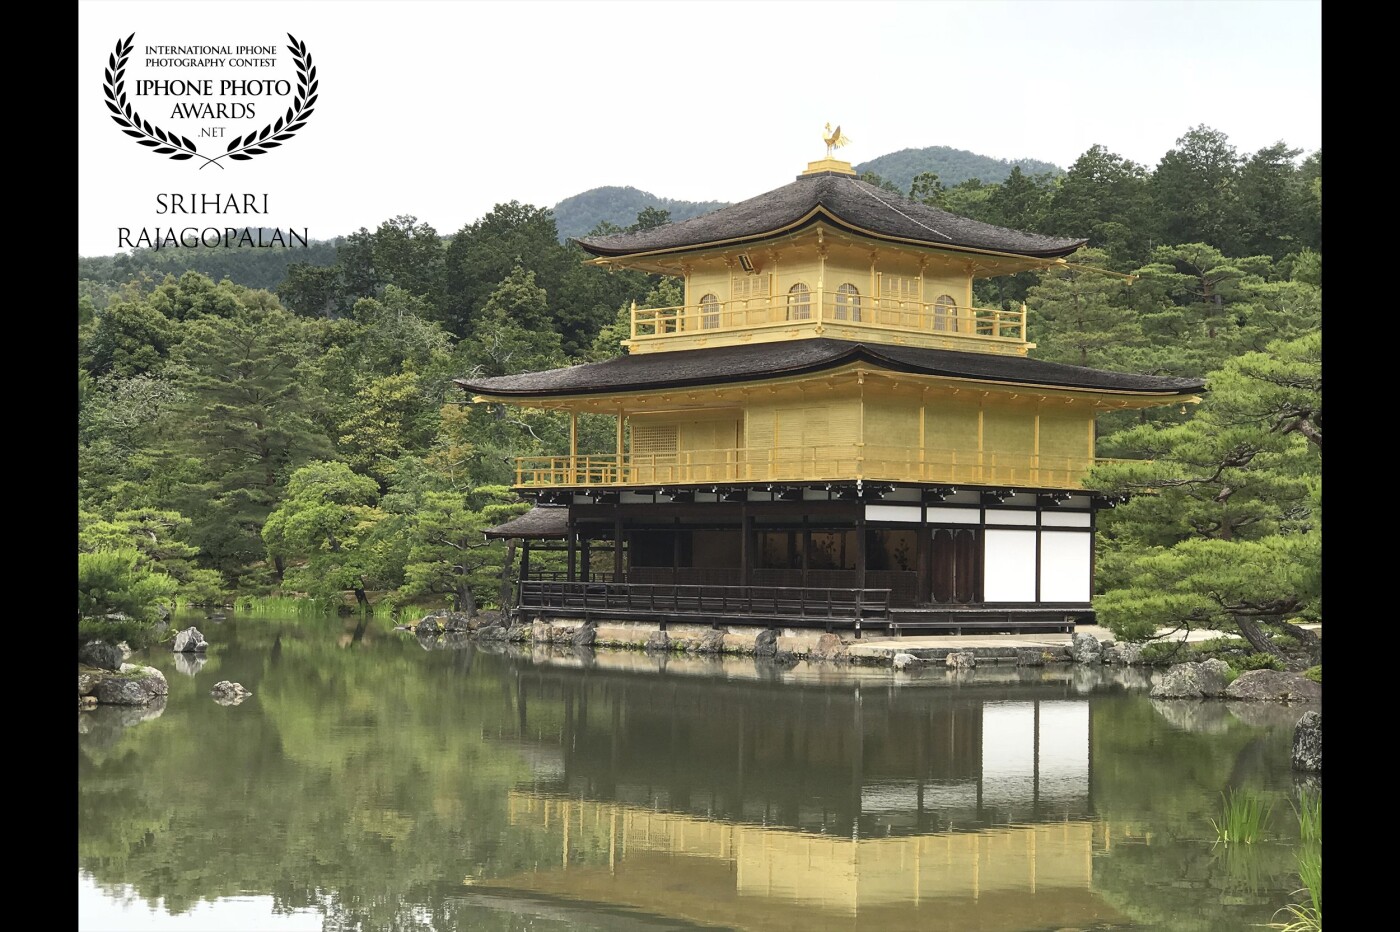 We got here after getting lost in Kyoto a couple of times after getting on the wrong bus (205 Rapid that does not stop here).  Nevertheless, it was a fun experience and after getting there we marveled at the Beautiful Kinkakuji temple (Golden Pavilion).  